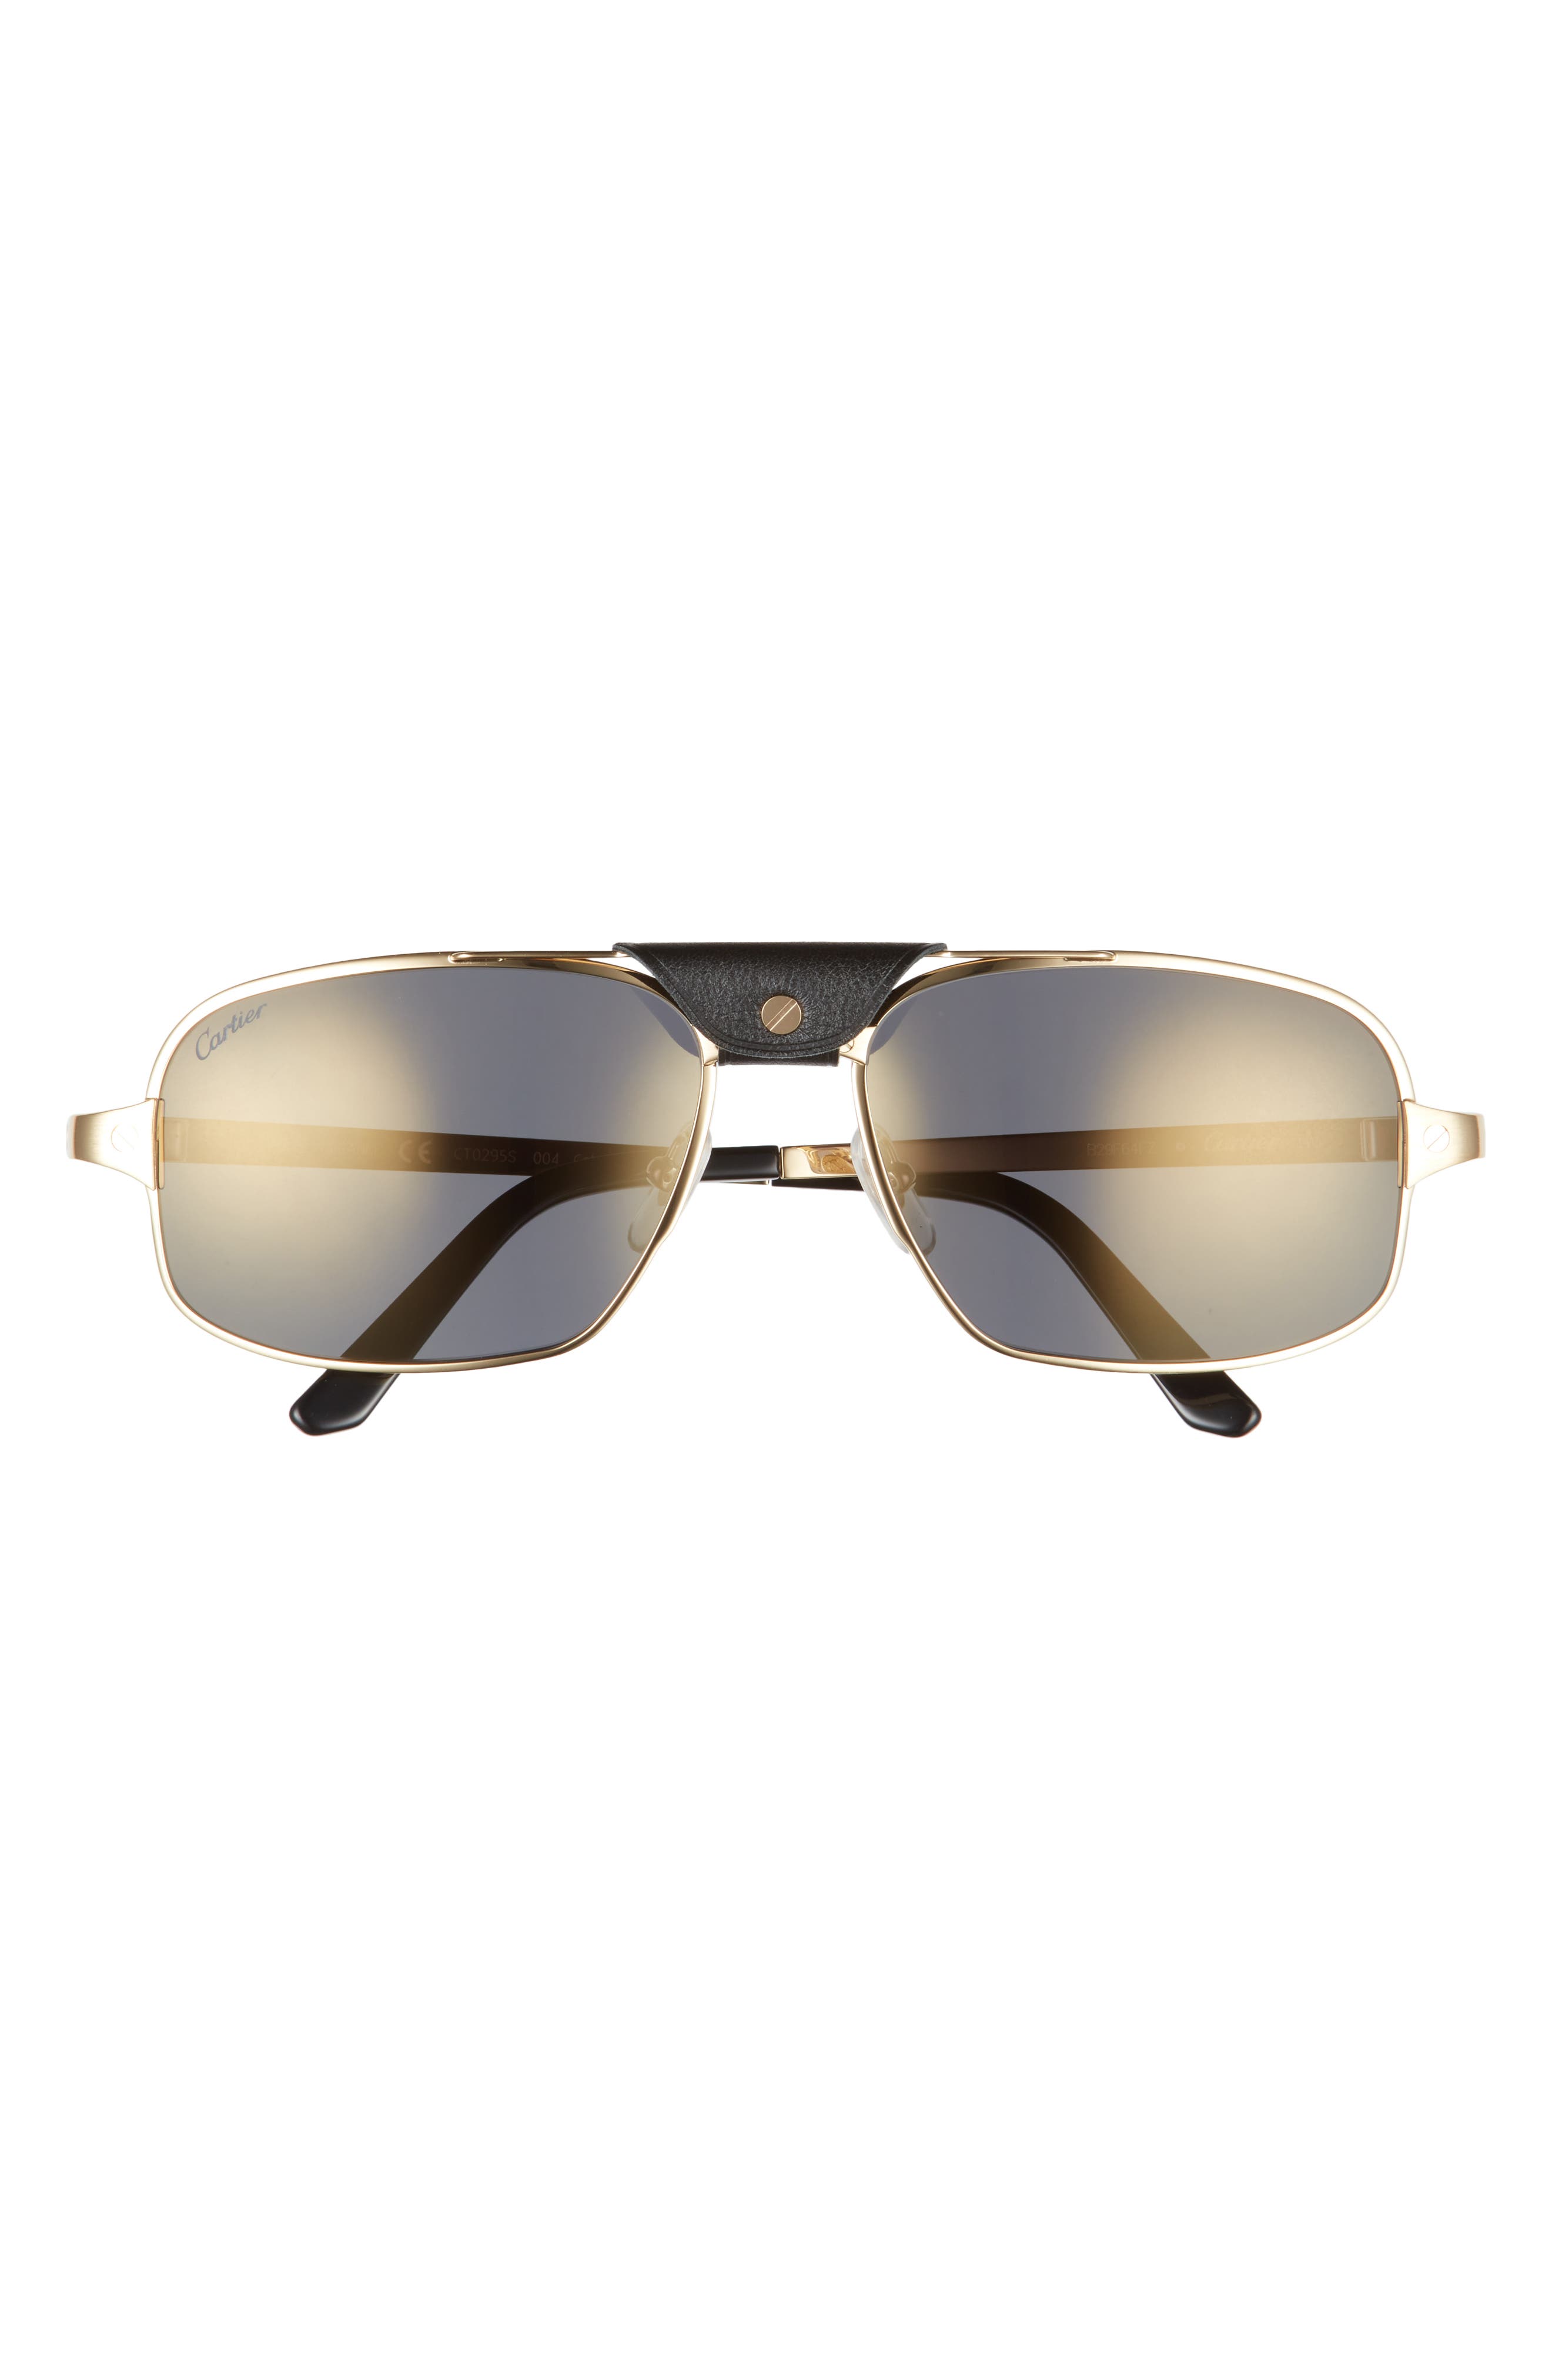 Cartier 60mm Aviator Sunglasses in Gold at Nordstrom